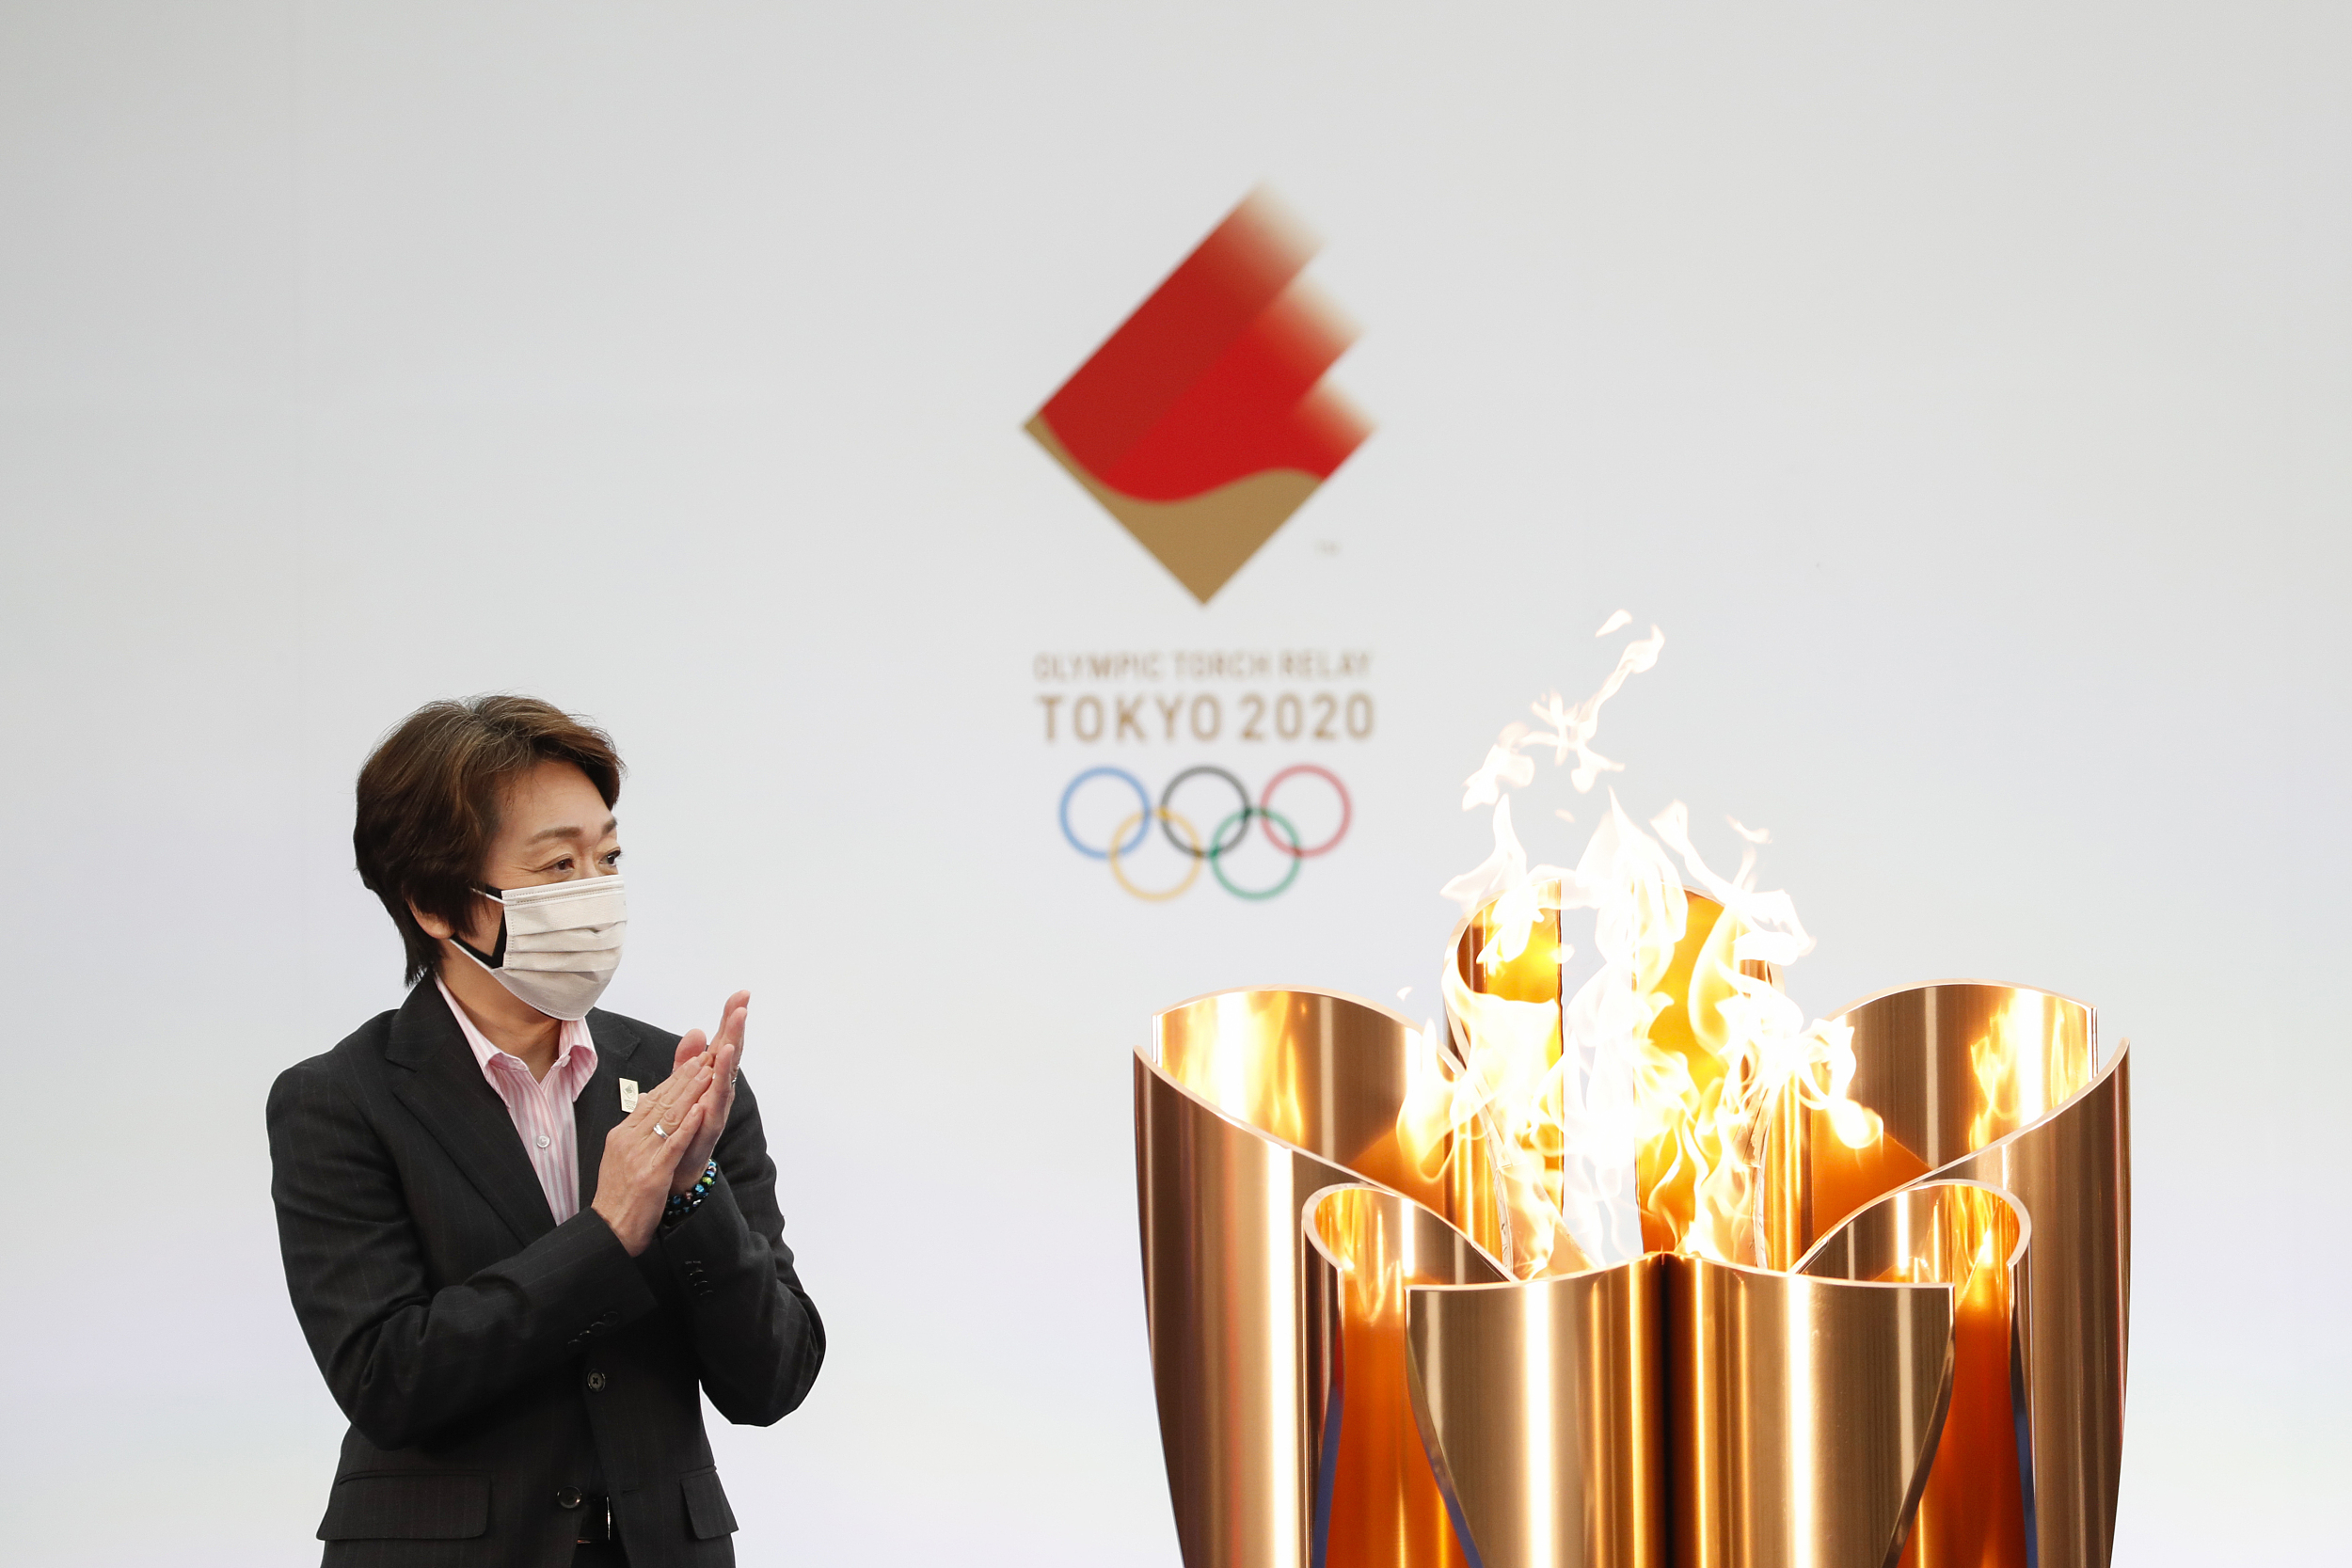 The fire of Olympic Games emperor with close-up labyrinthian ｜ is delivered, the spark that never goes out hopes